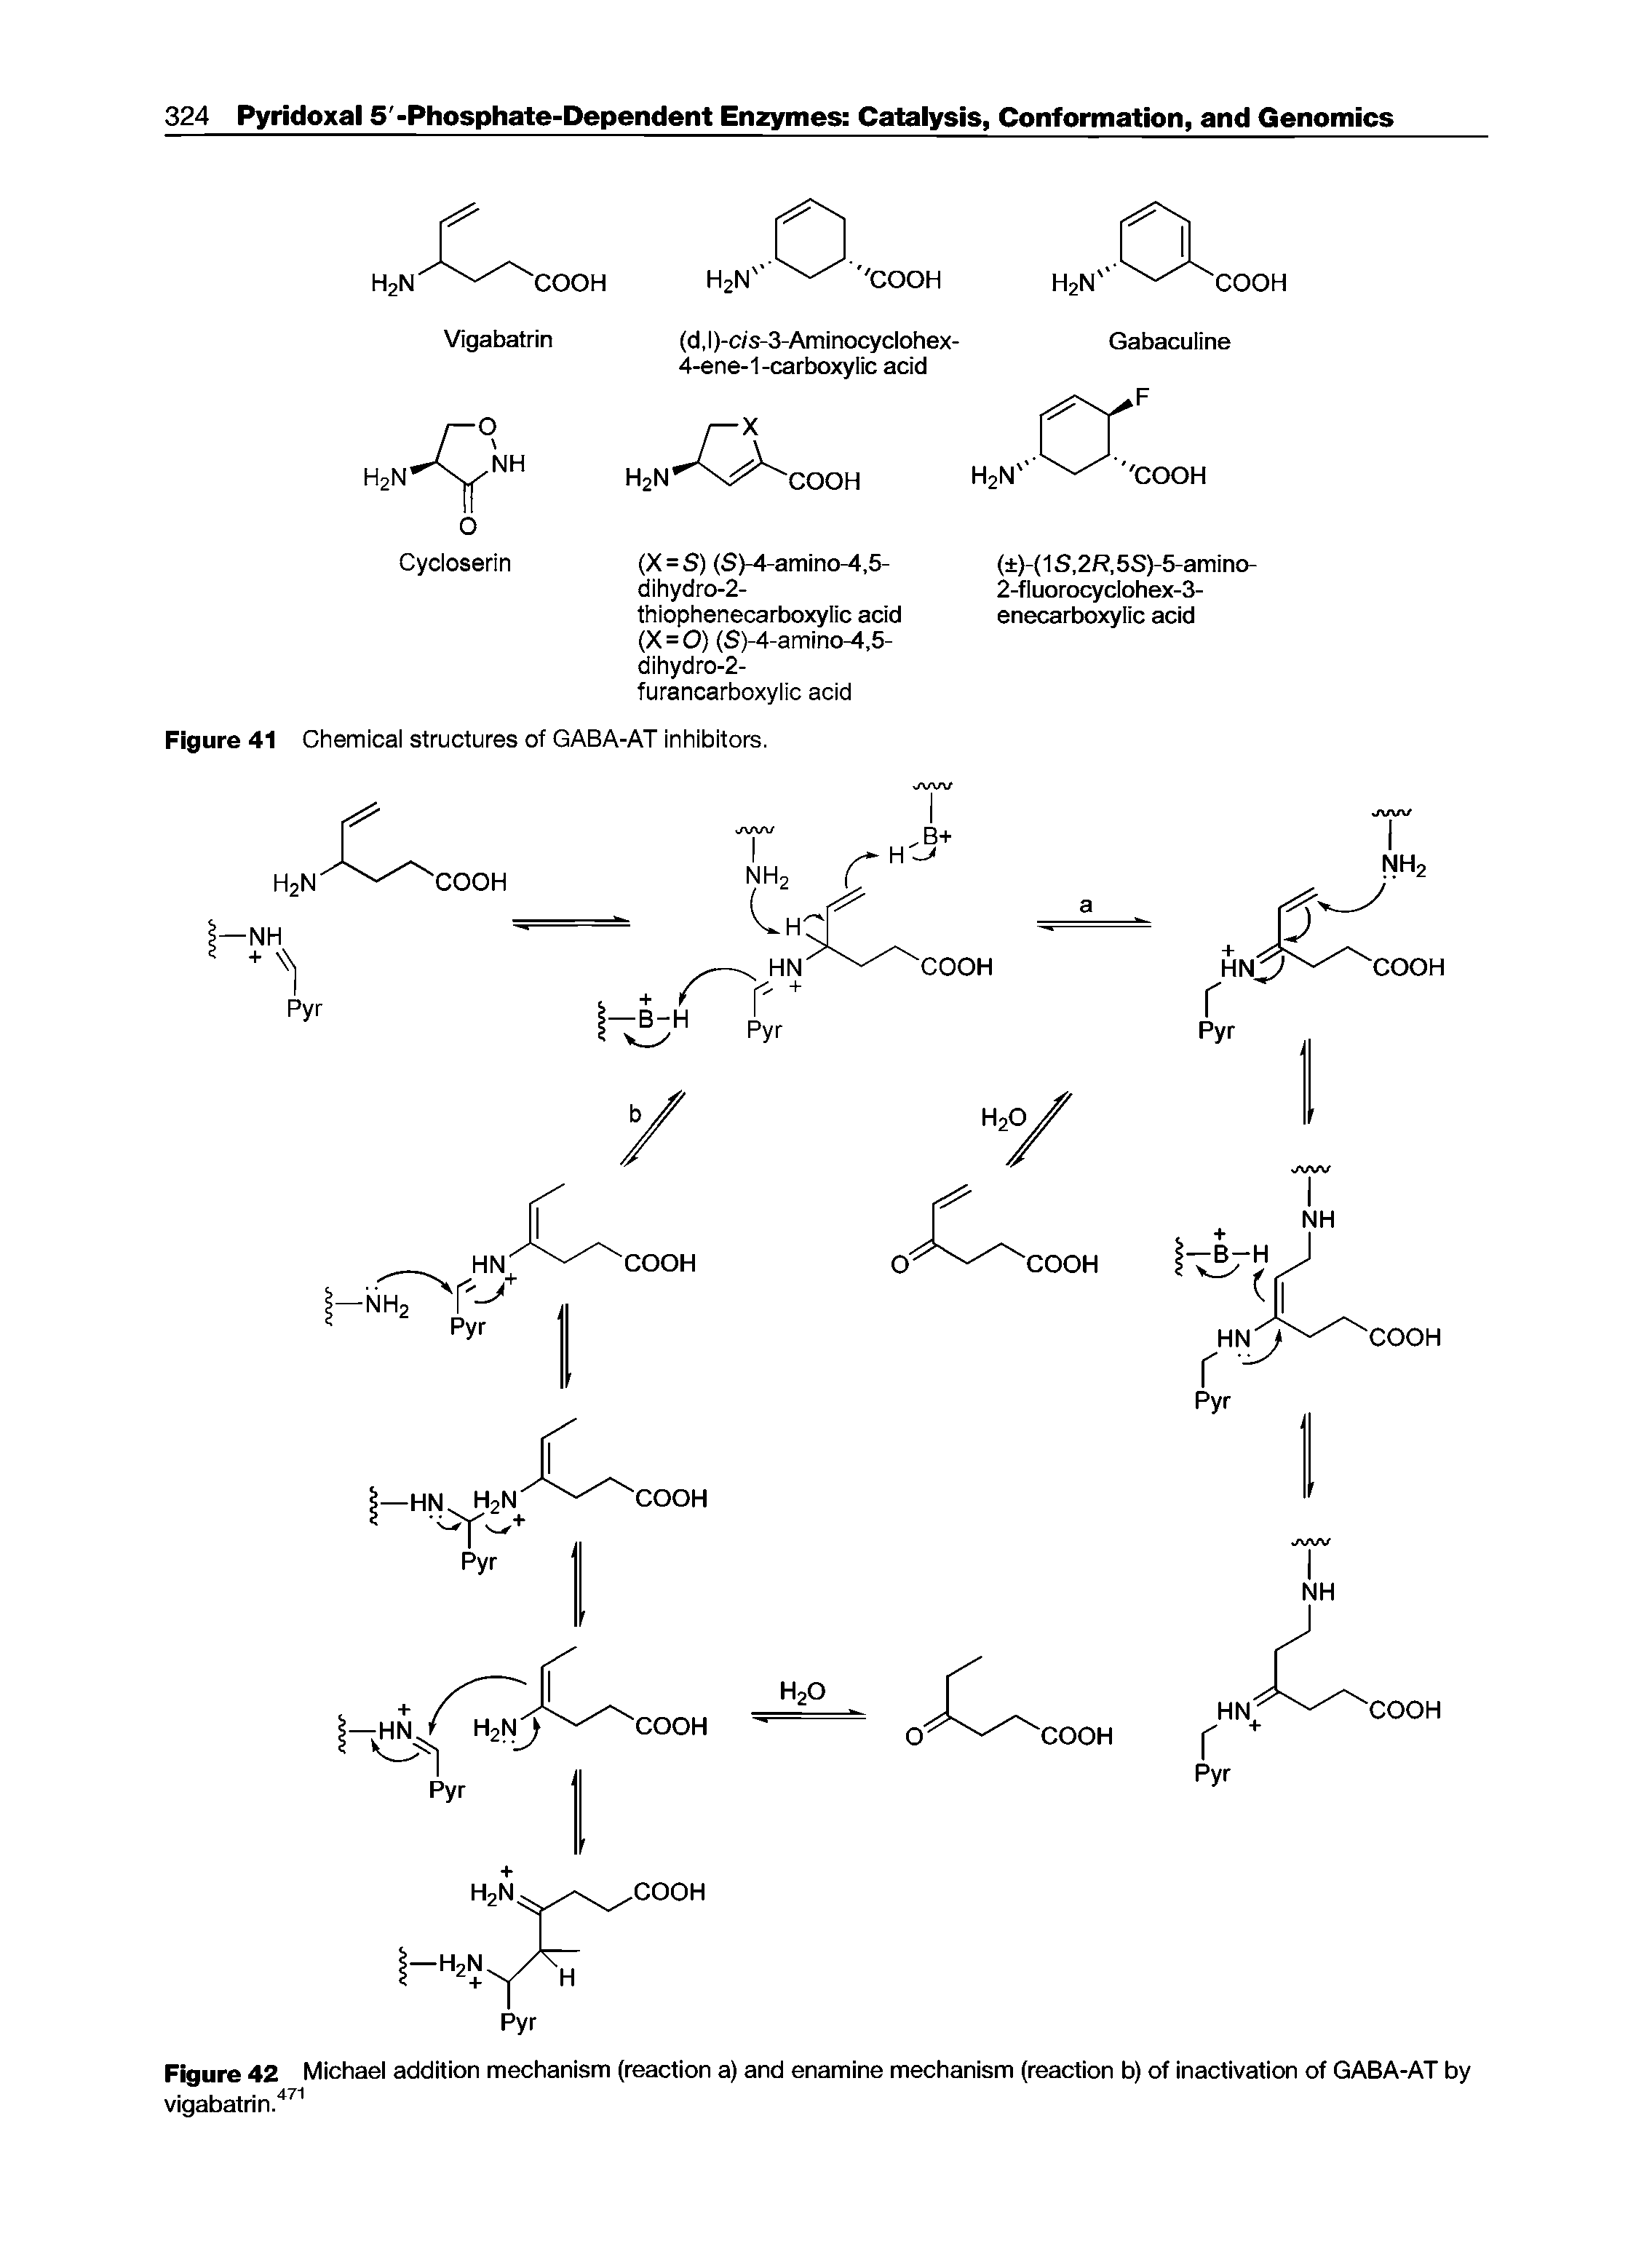 Figure 42 Michael addition mechanism (reaction a) and enamine mechanism (reaction b) of inactivation of GABA-AT by...